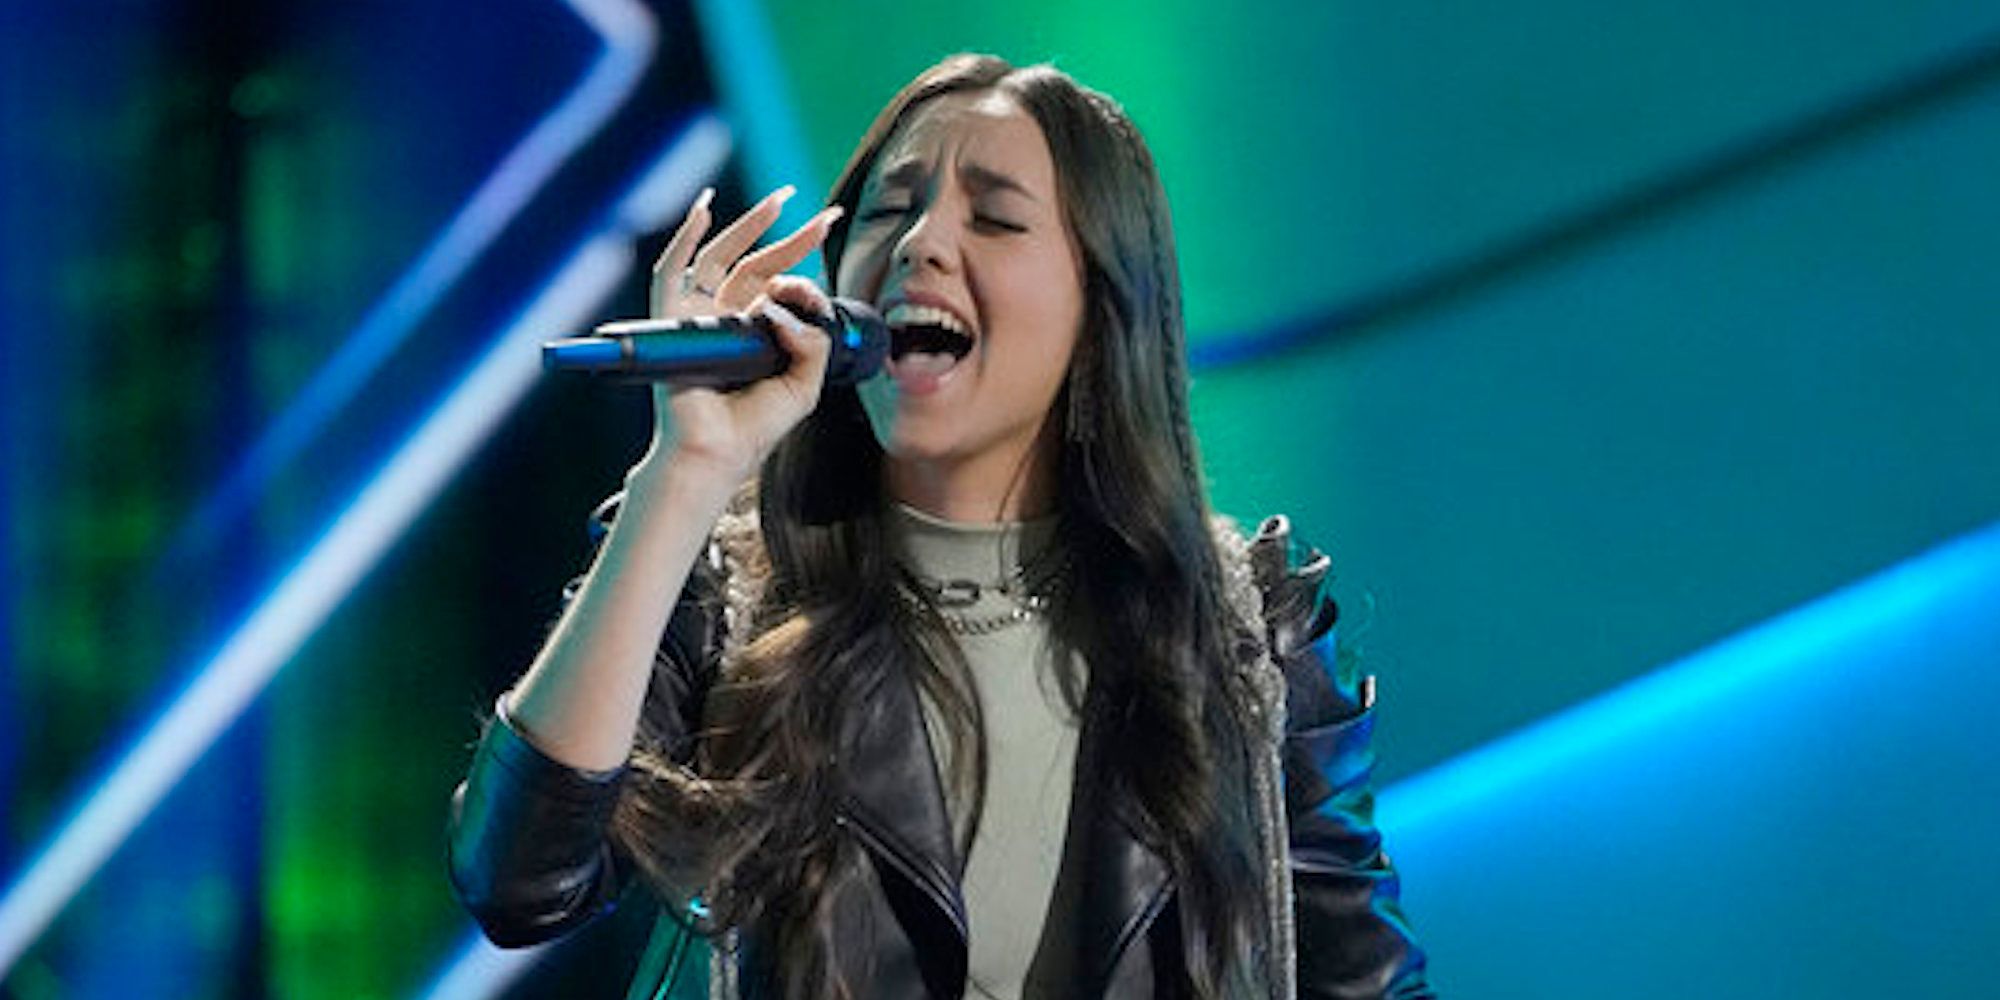 Maddi Jane auditions with a mic in her hand on 'The Voice'